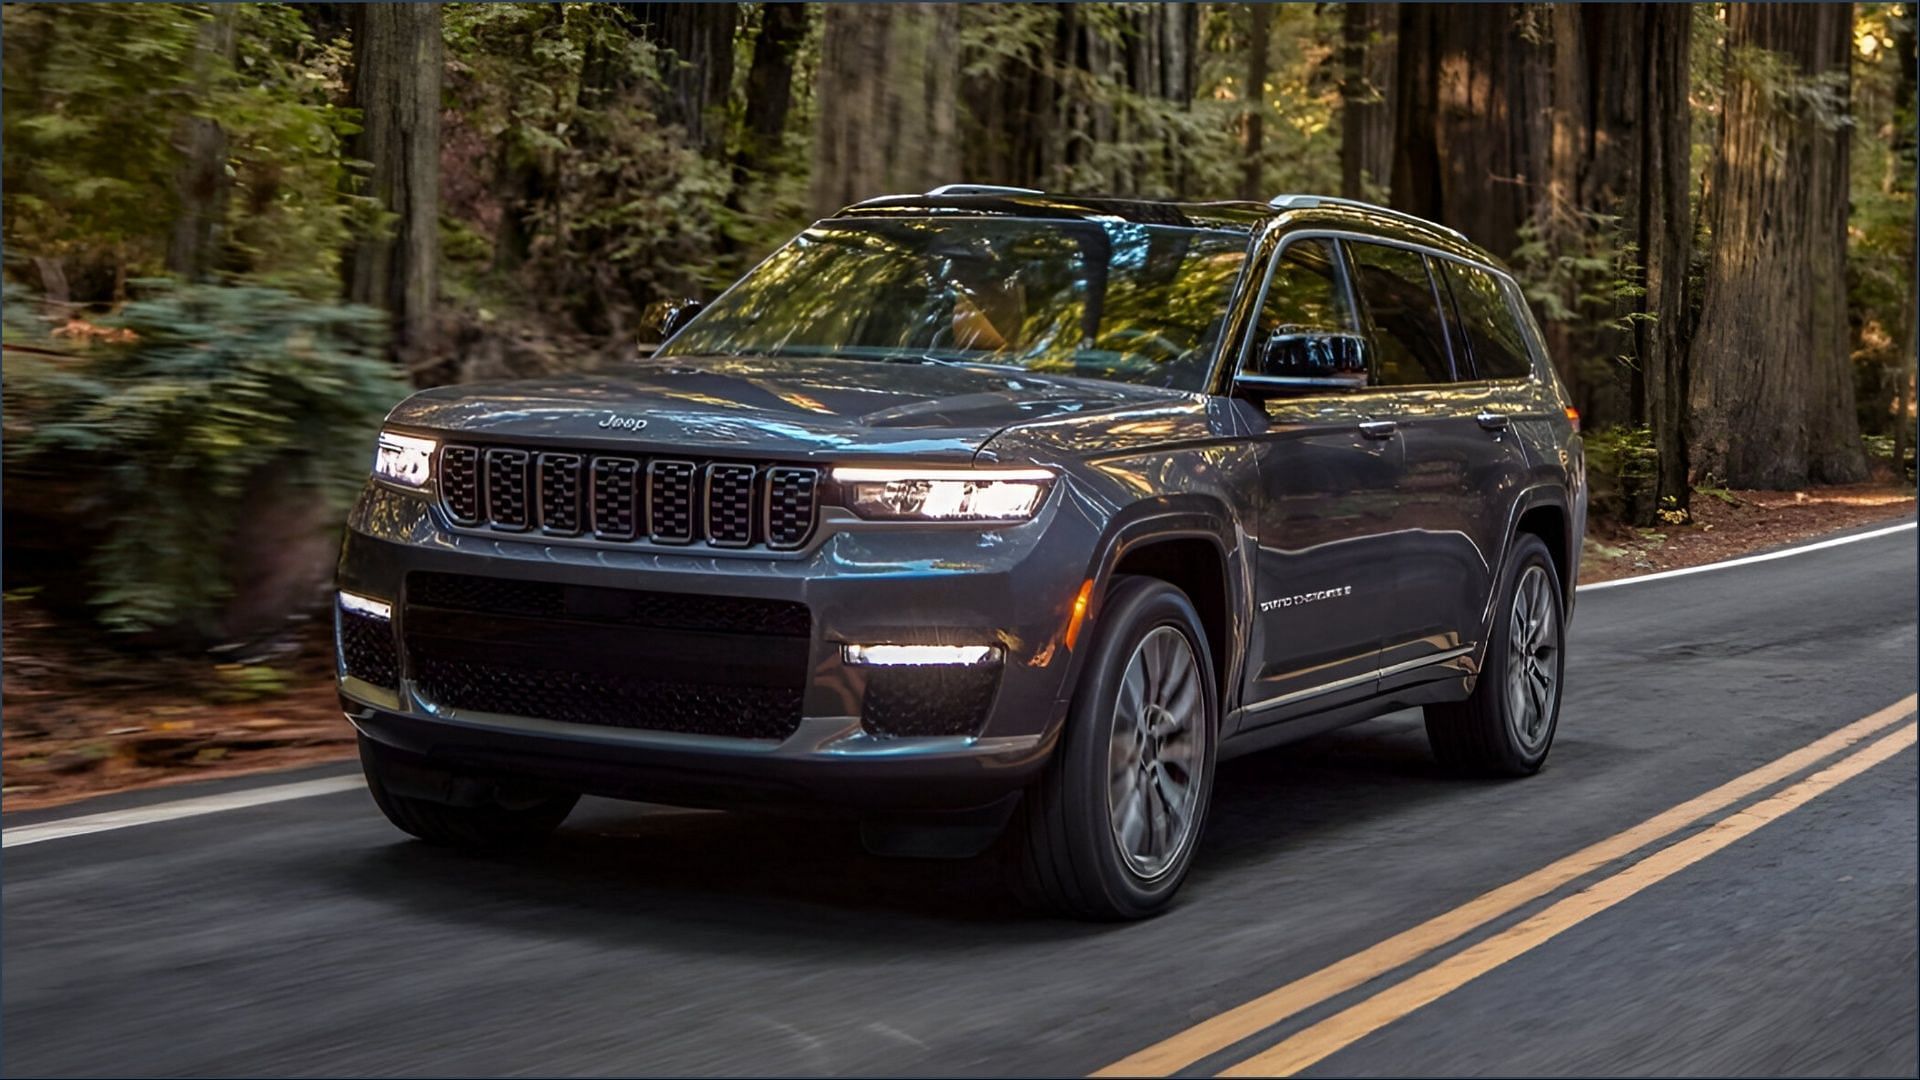 Chrysler recalls Jeep Grand Cherokee L vehicles over a suspension and steering issue (Image via Chrysler)